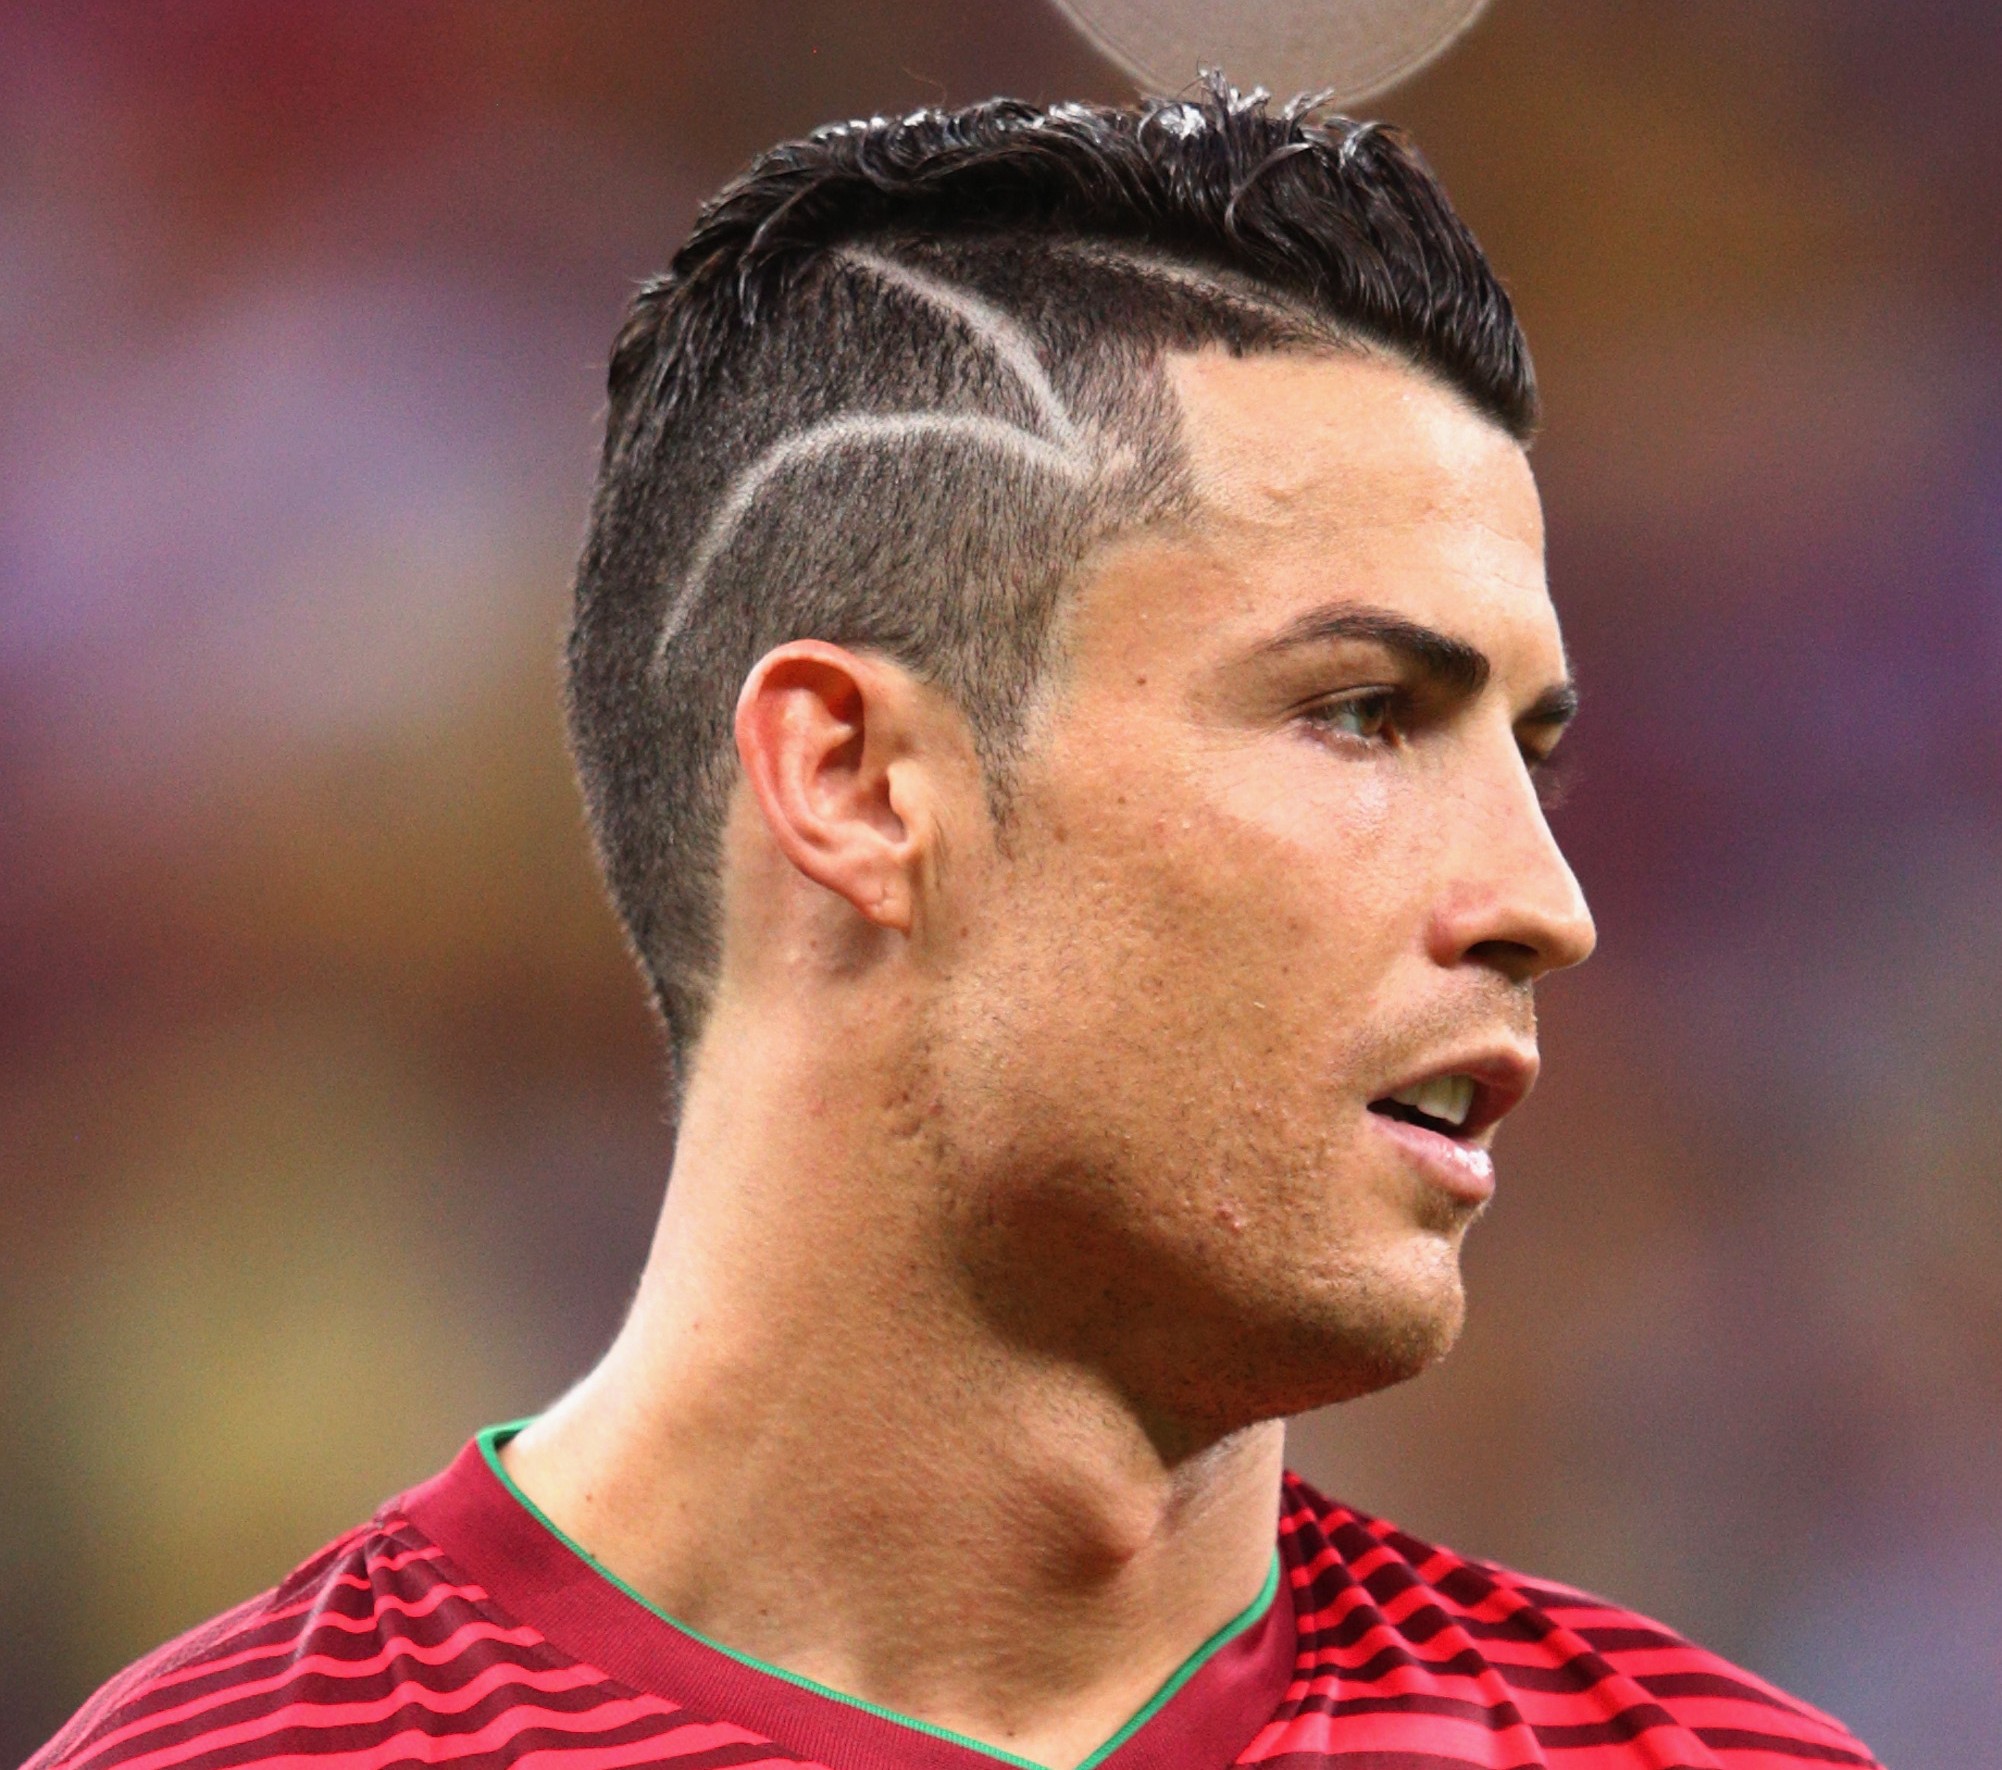 Cristiano Ronaldo got a ridiculous haircut before playing the United States  | For The Win